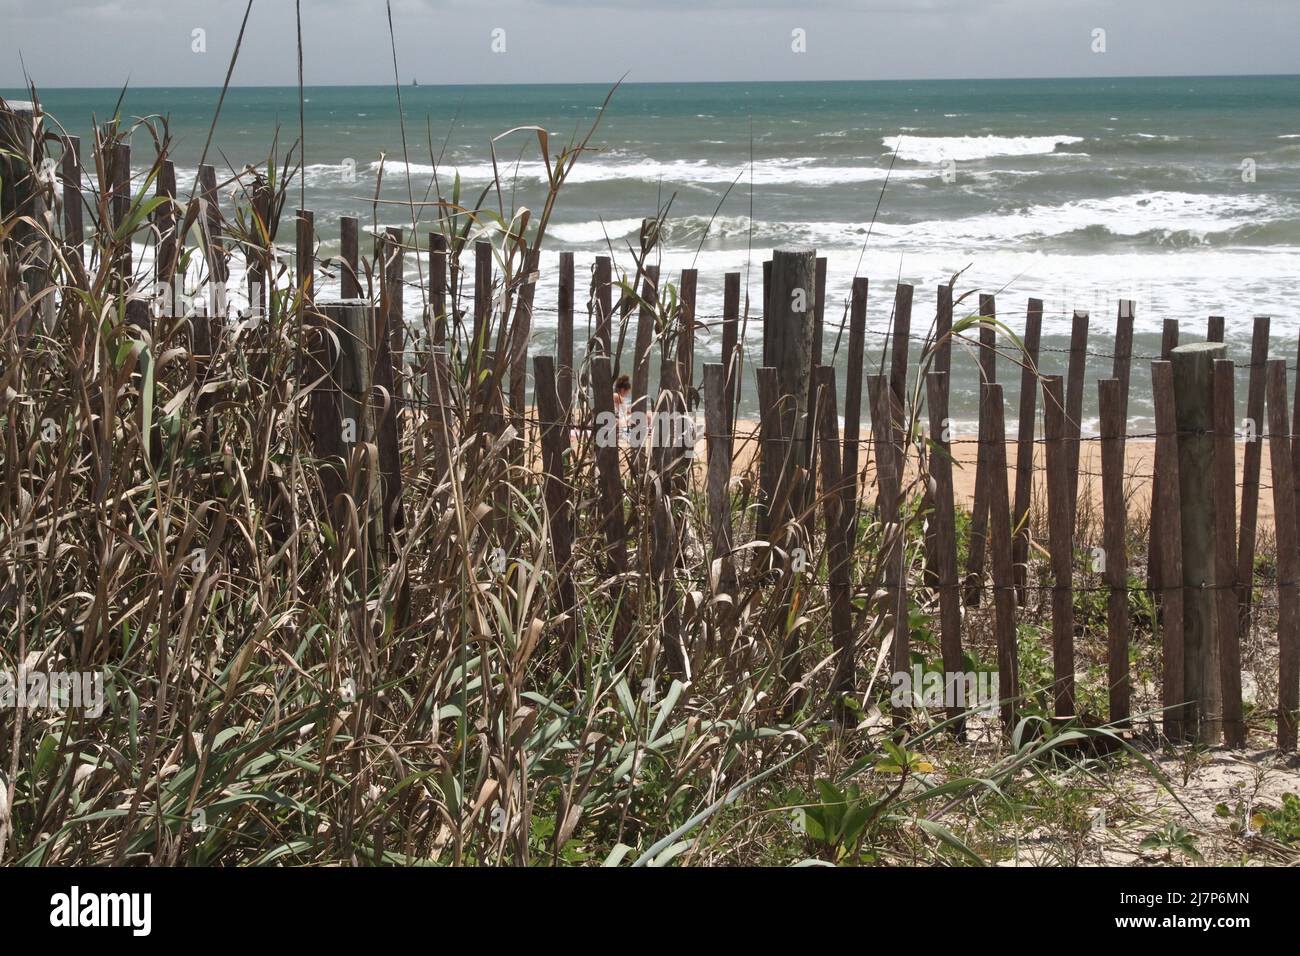 Beach fence on dunes with view of ocean waves Stock Photo